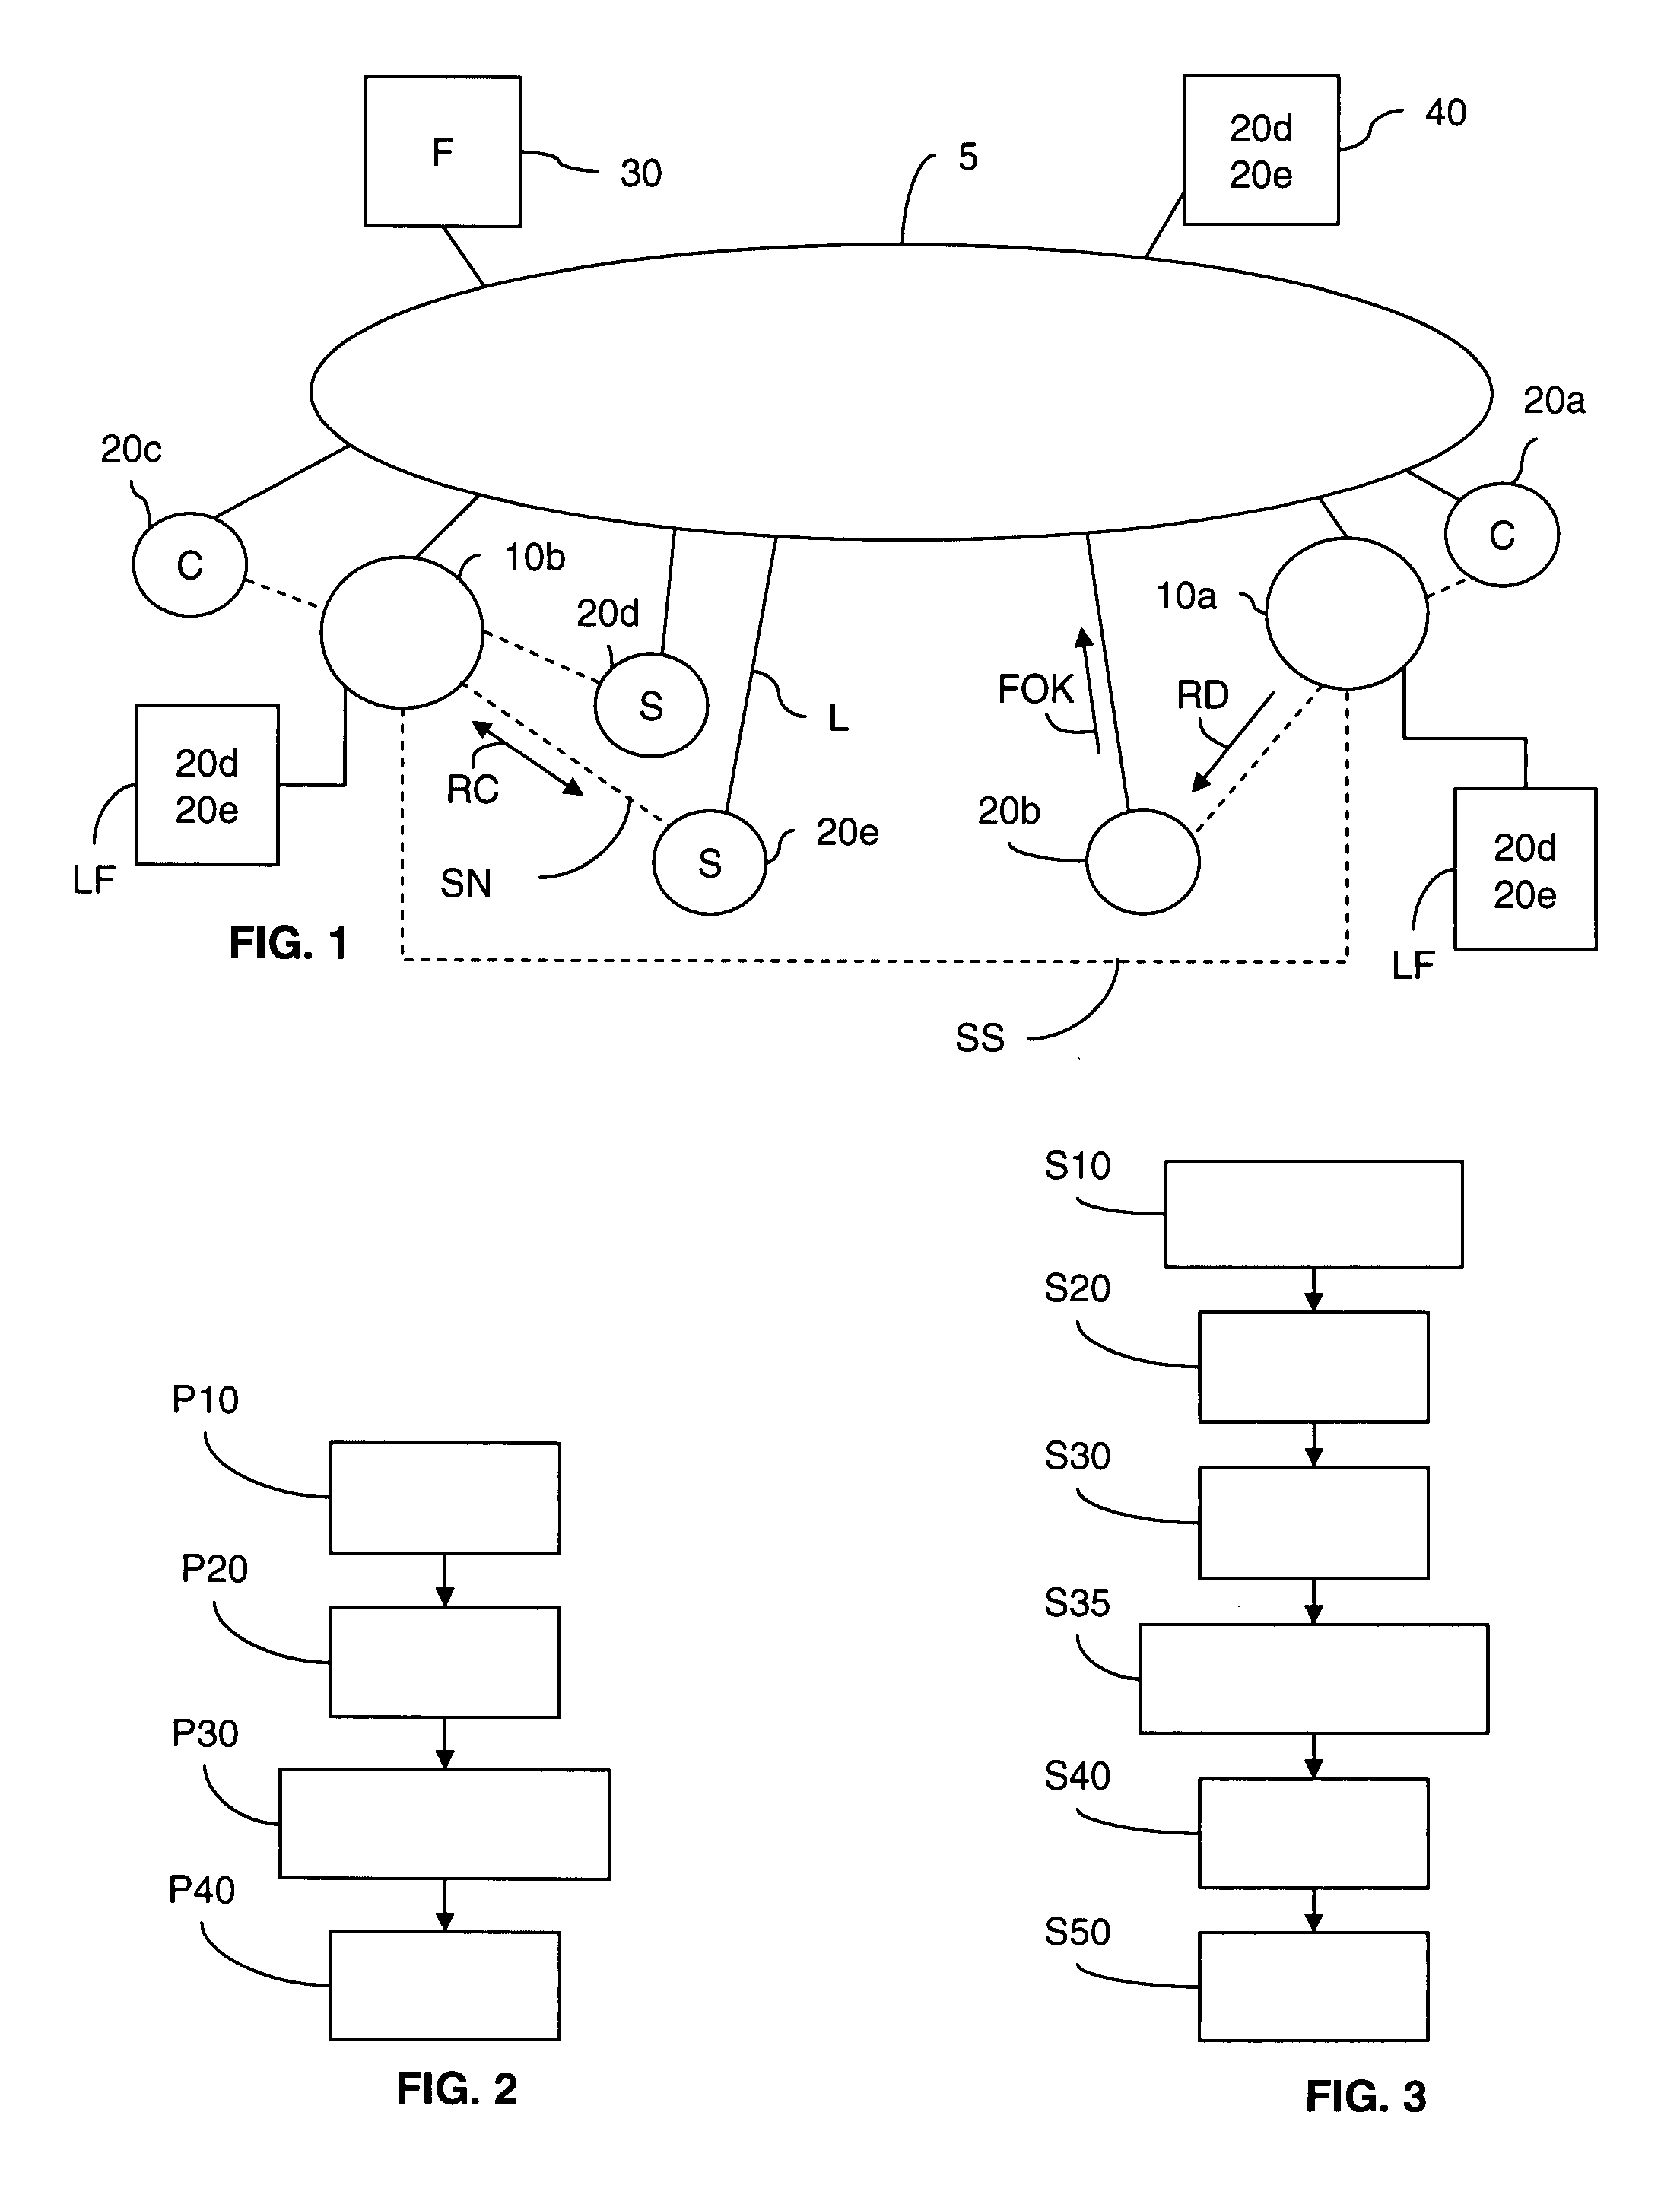 System and Method For Establishment of a Client/Server Type Relationship in a Pair-To-Pair Network